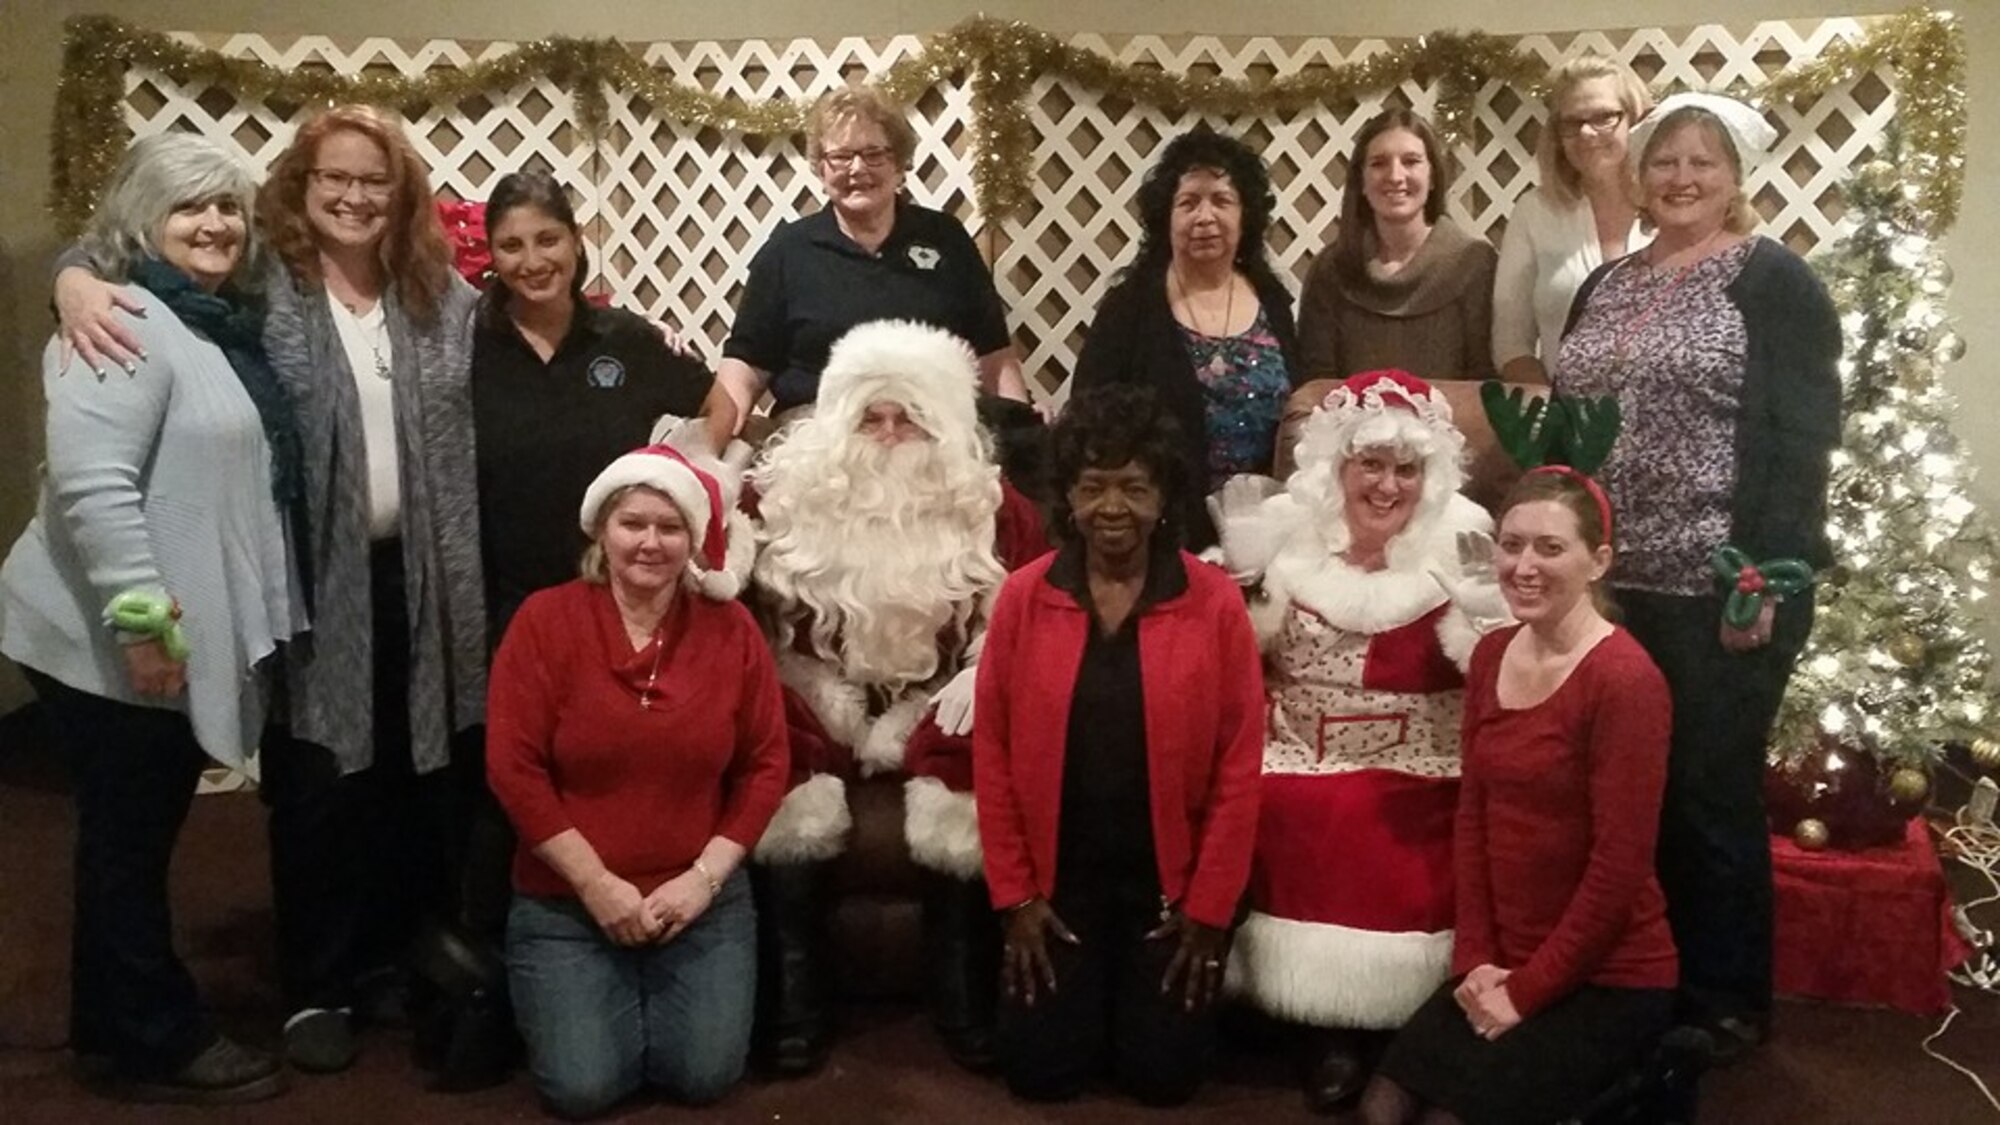 Members of the Enlisted Spouses Club Winter Wonderland Committee stand around Santa Clause at the 21st Annual Winter Wonderland at the Bellevue Social Center, Bellevue, Neb., Dec. 12, 2015. The event provides gifts and activities for the children of active duty or retired service members. (Courtesy photo)